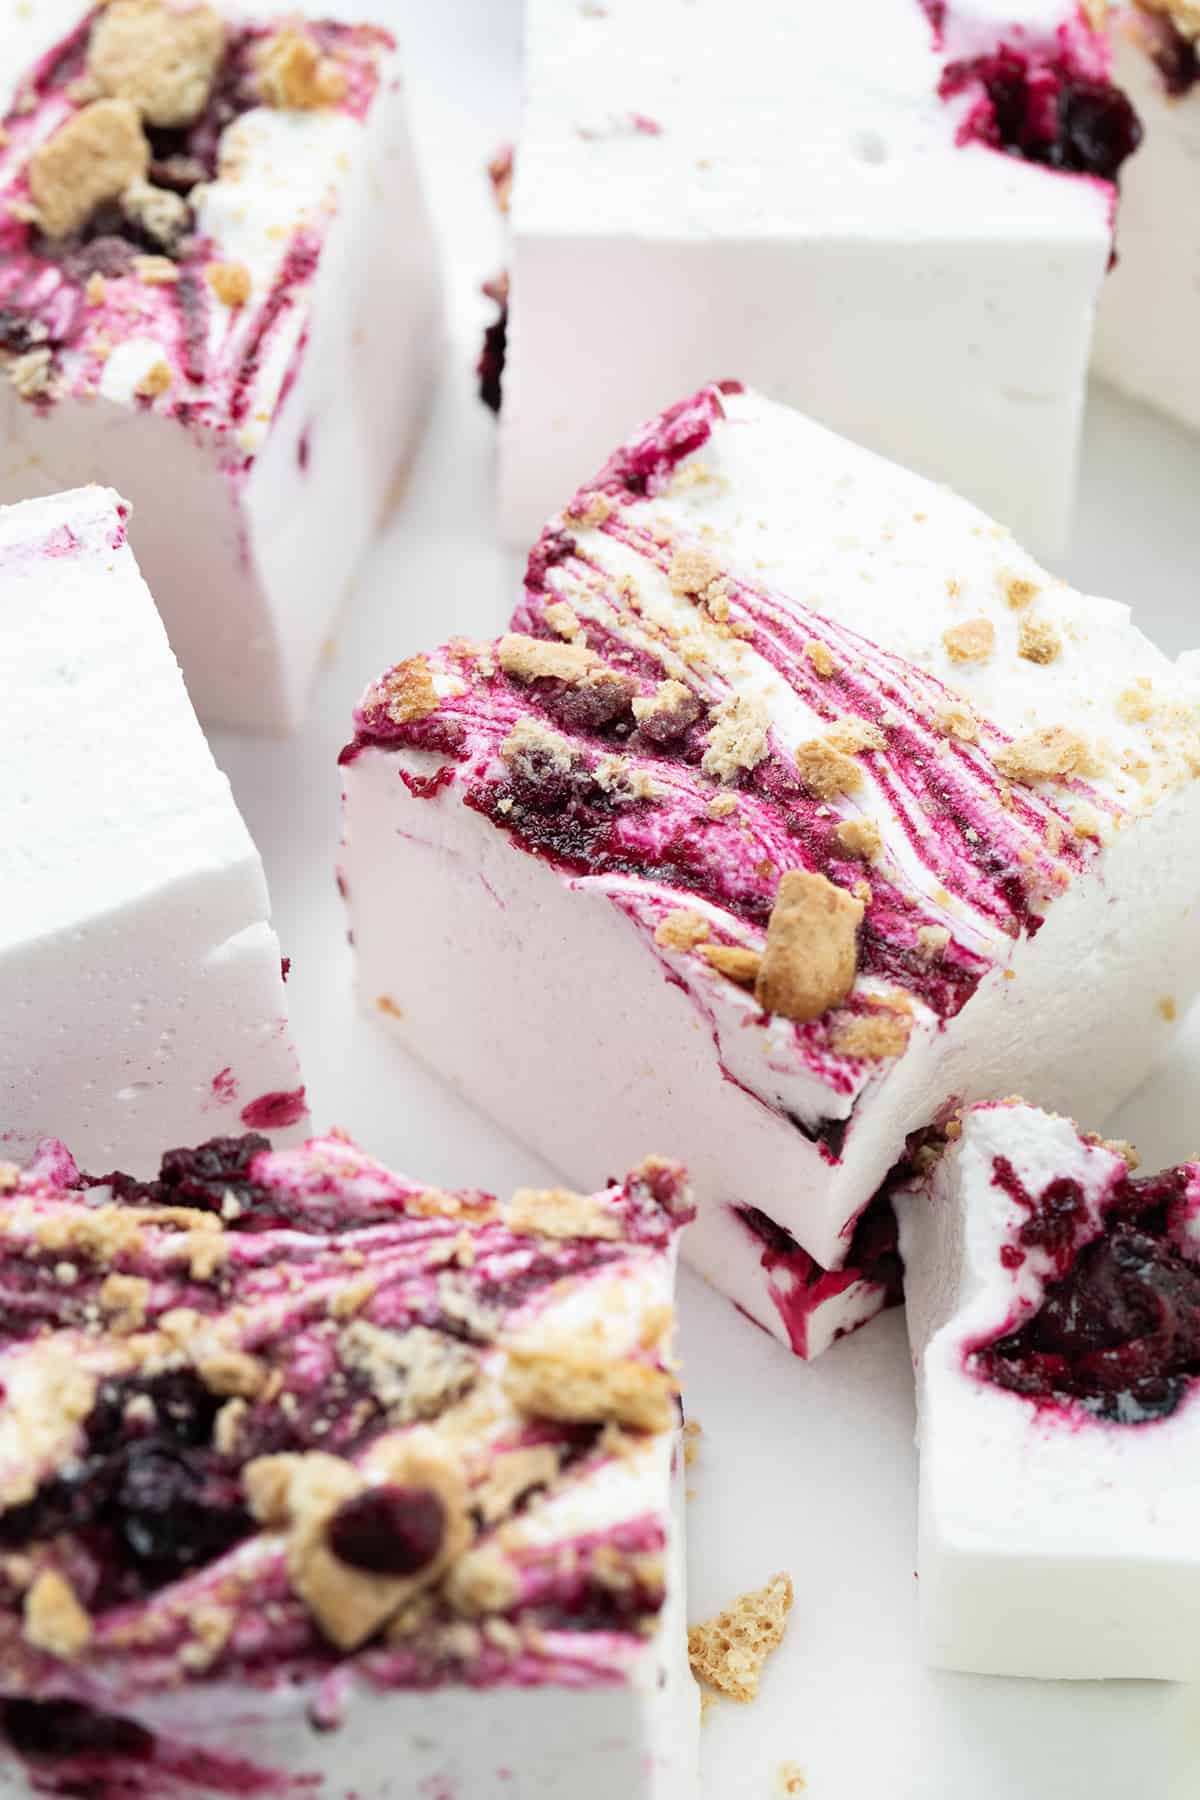 Pieces of Gourmet Blueberry Marshmallows On a White Surface and Cut into Squares.